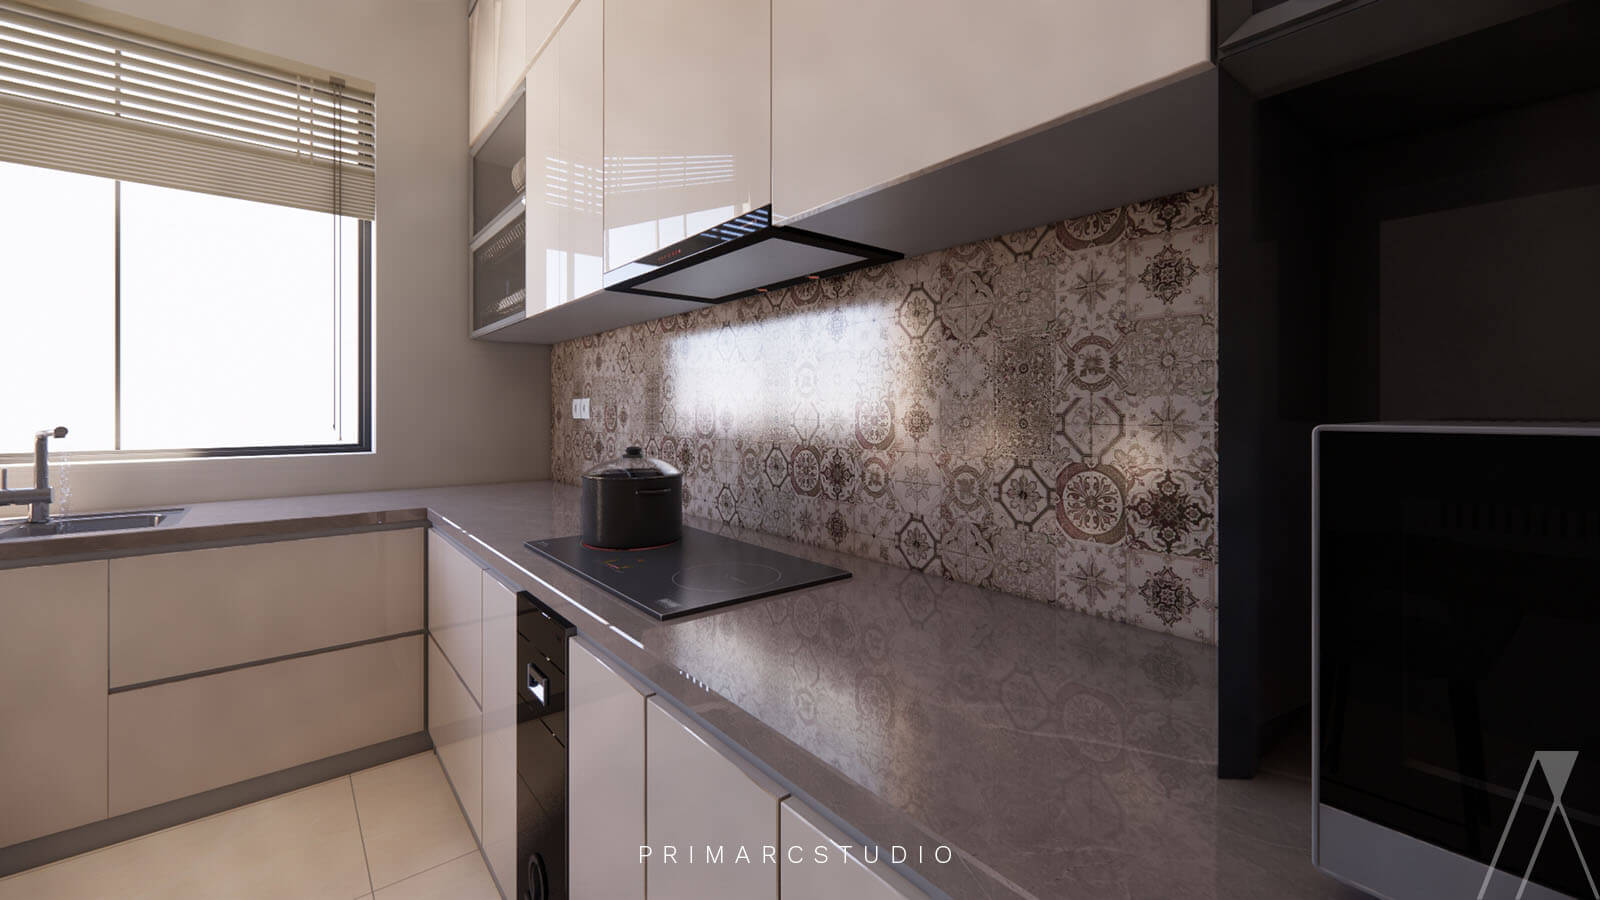 Kitchen interior design with marble slab and tile on the wall.